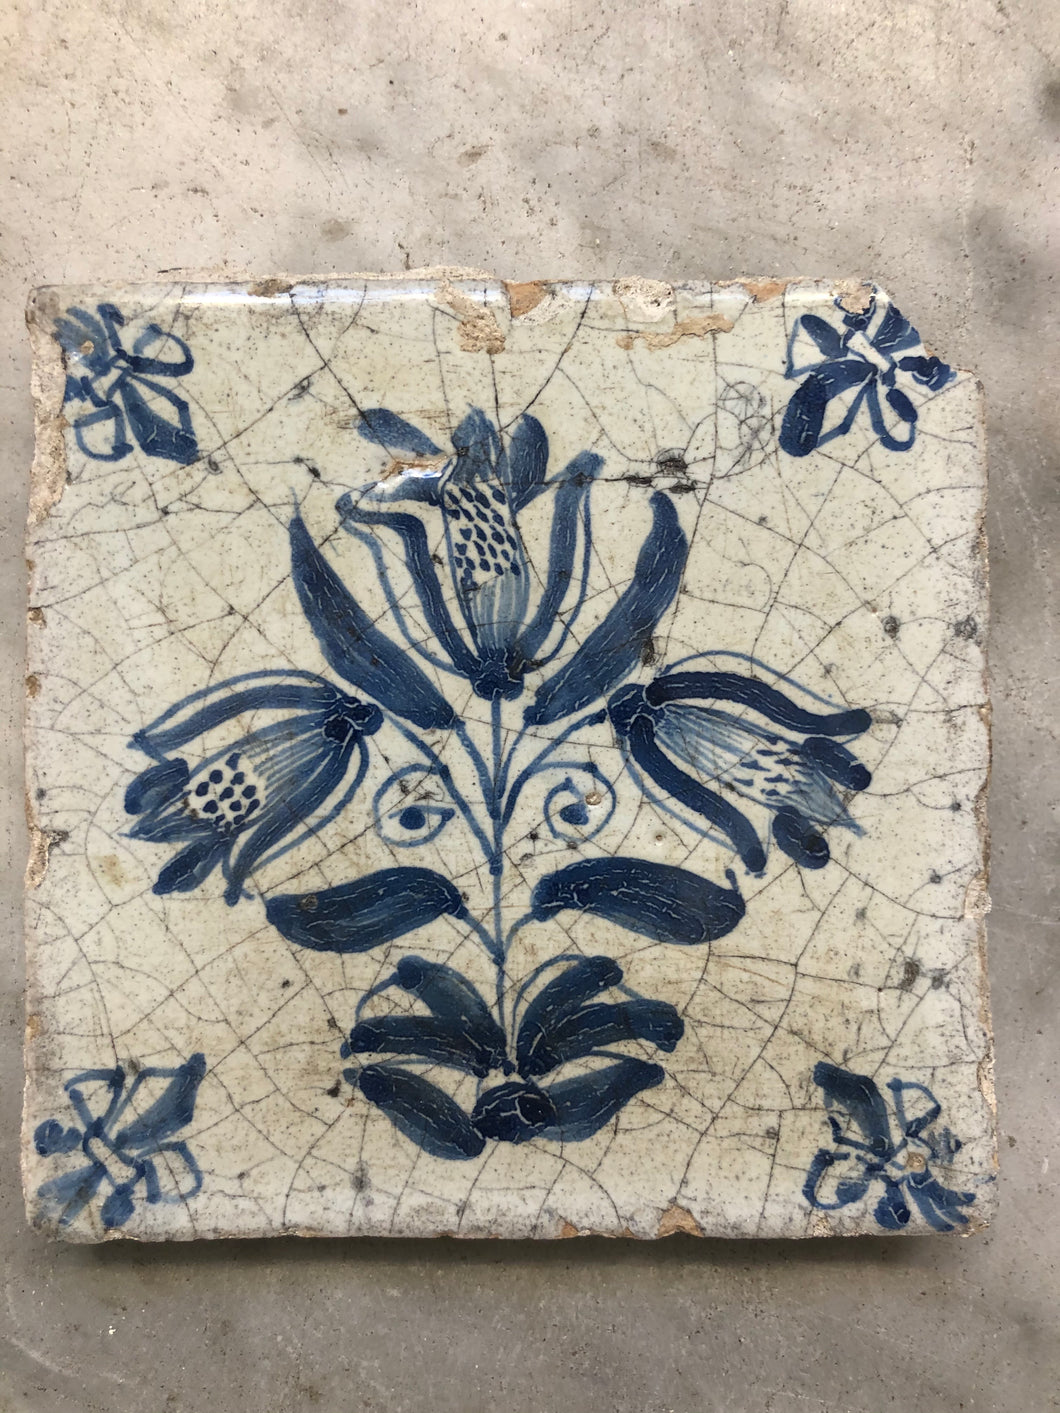 Rare Delft handpainted dutch tile with tulips